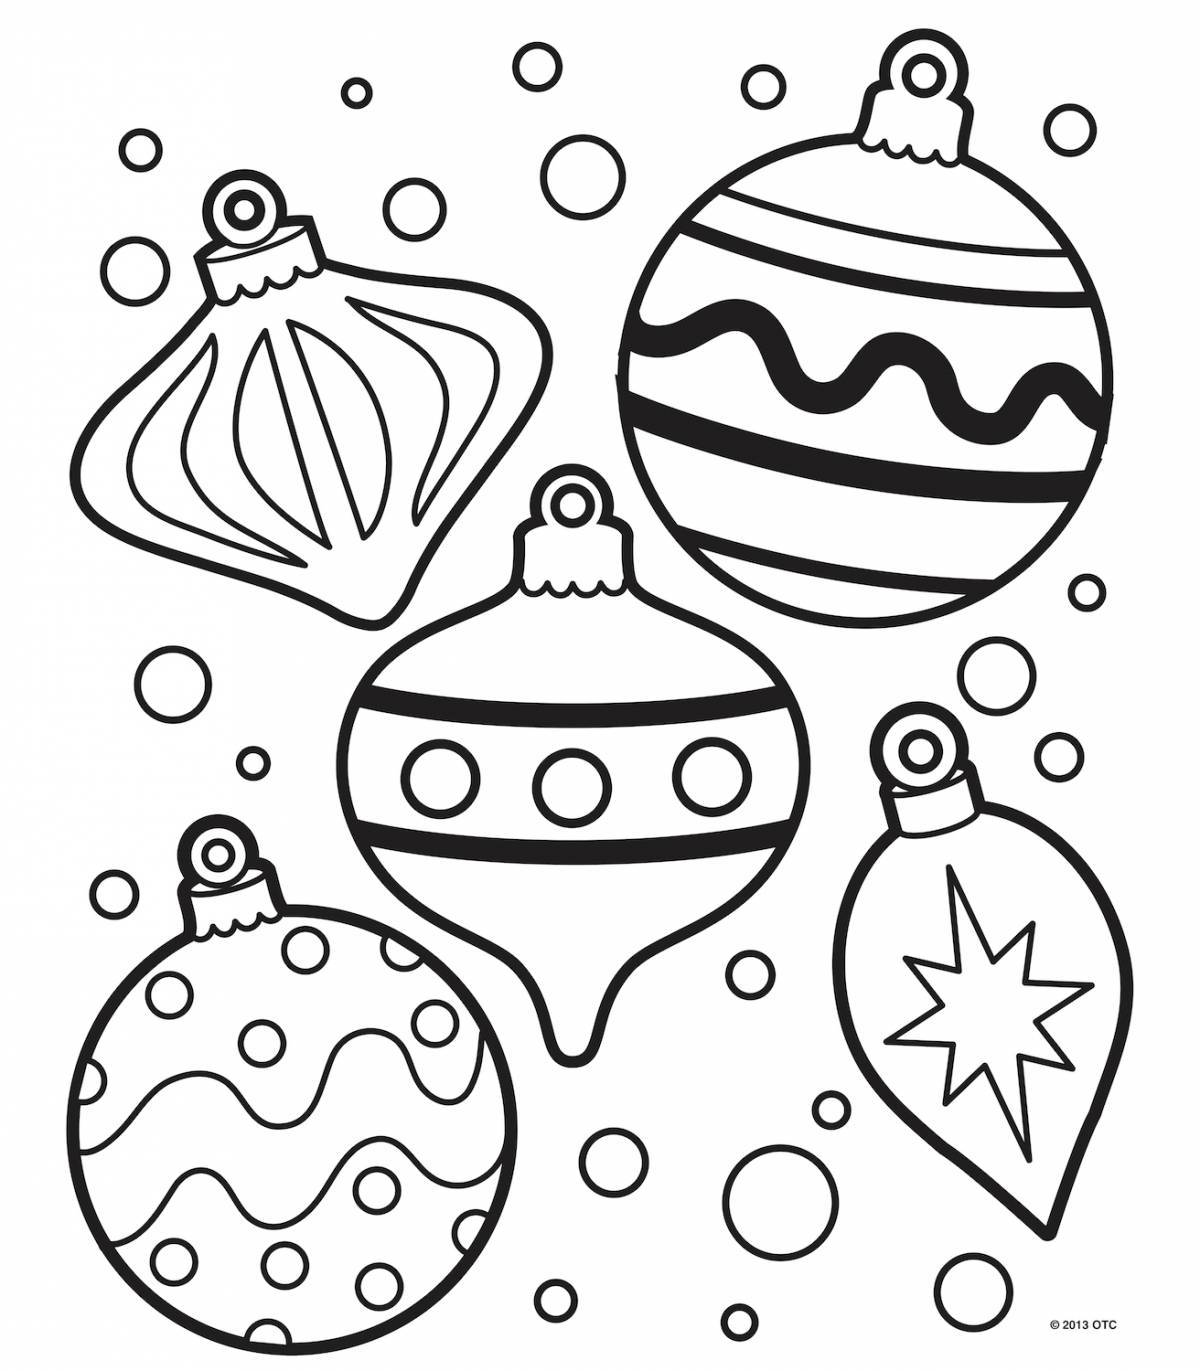 Fun Christmas coloring toy